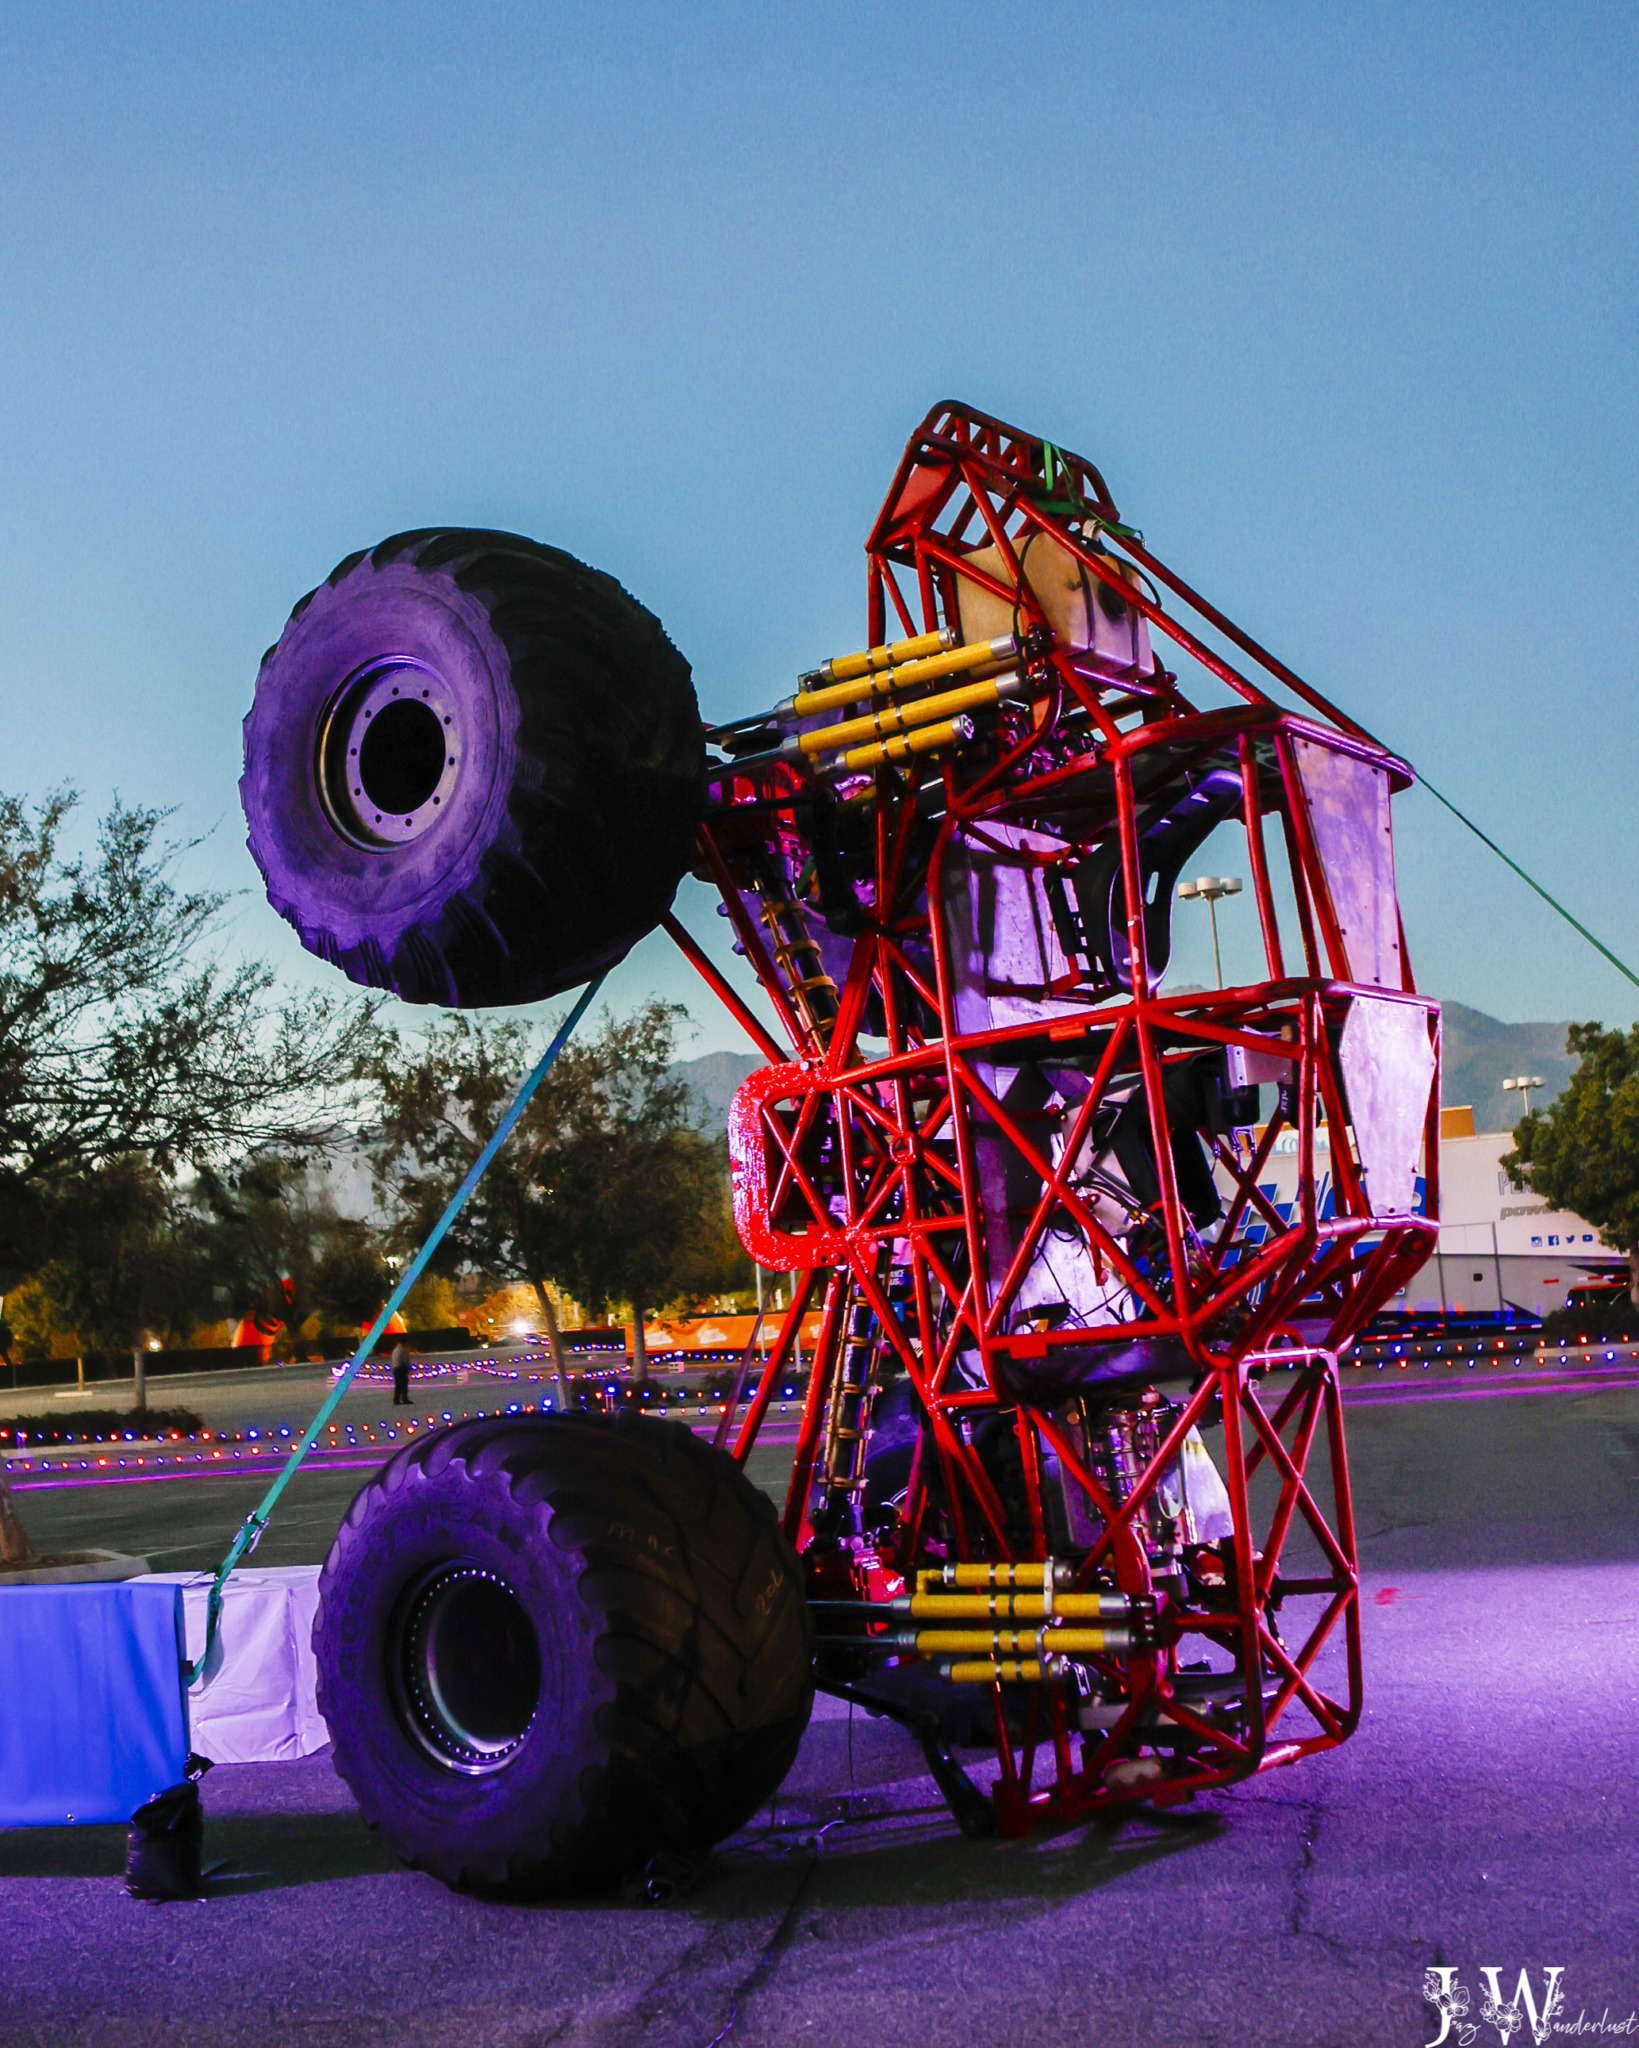 Hot wheels and monster trucks live tour event. Photography by Jaz Wanderlust.